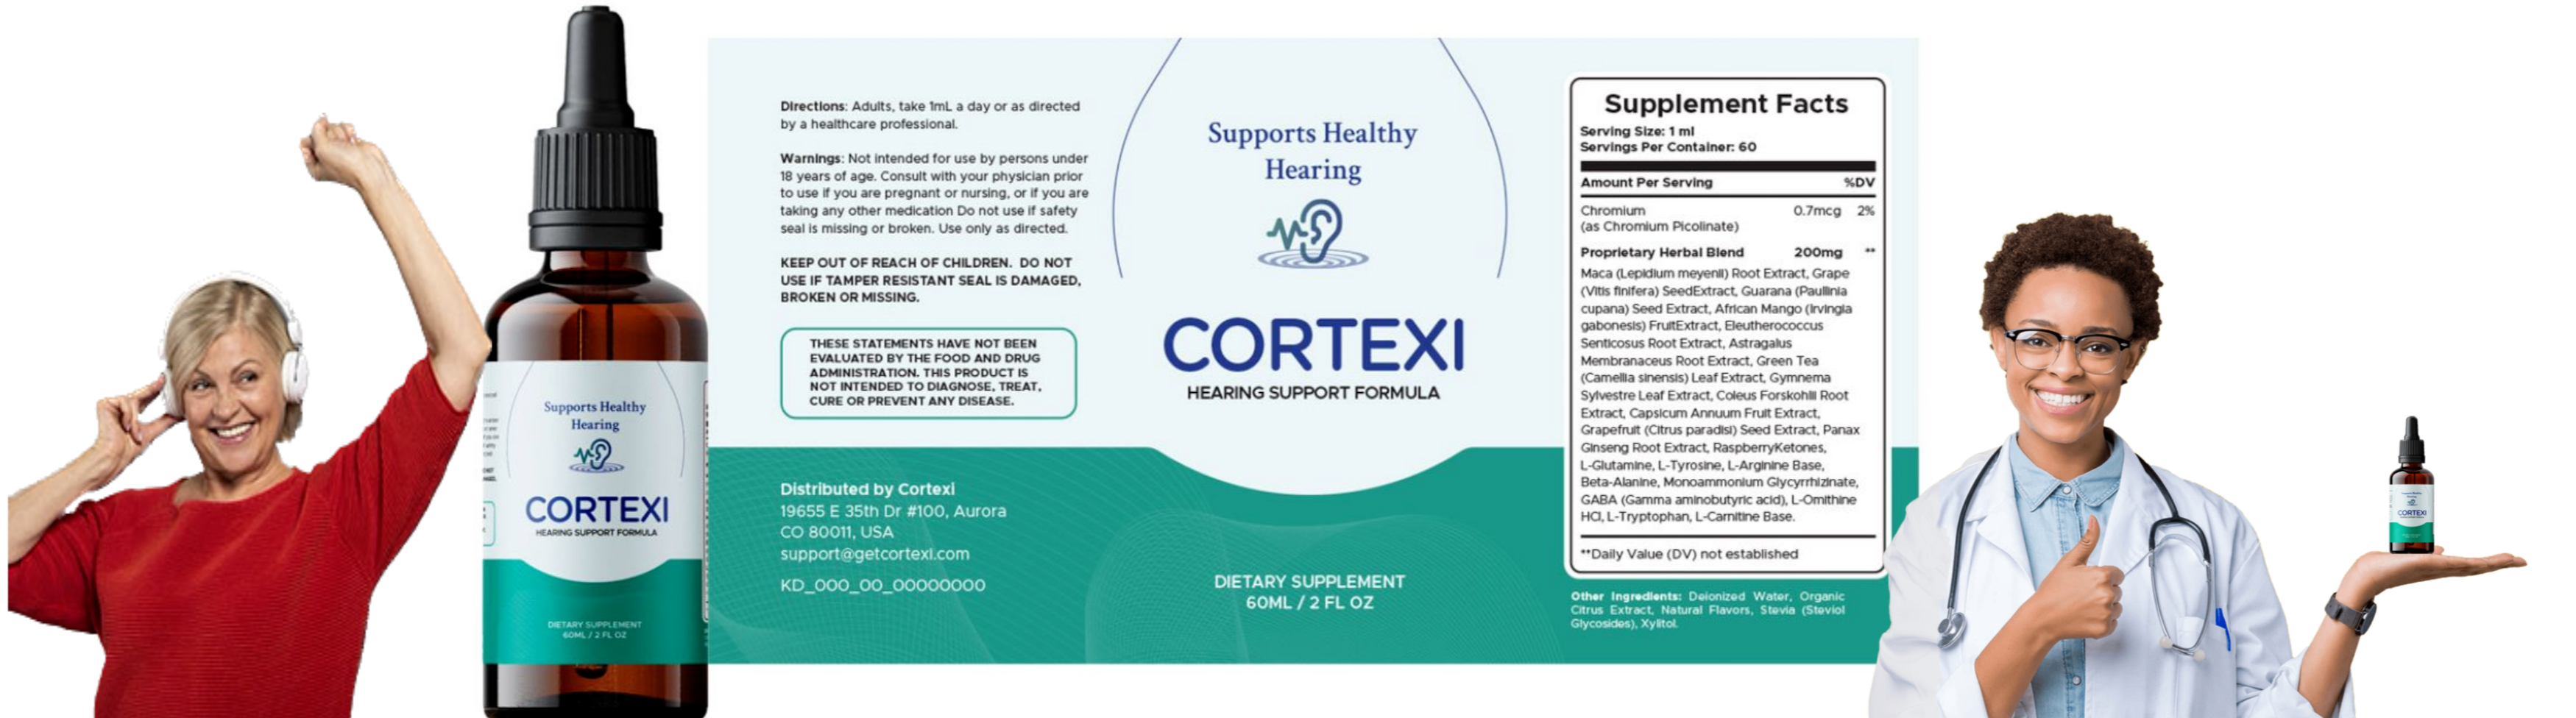 Cortexi™ Hearing support